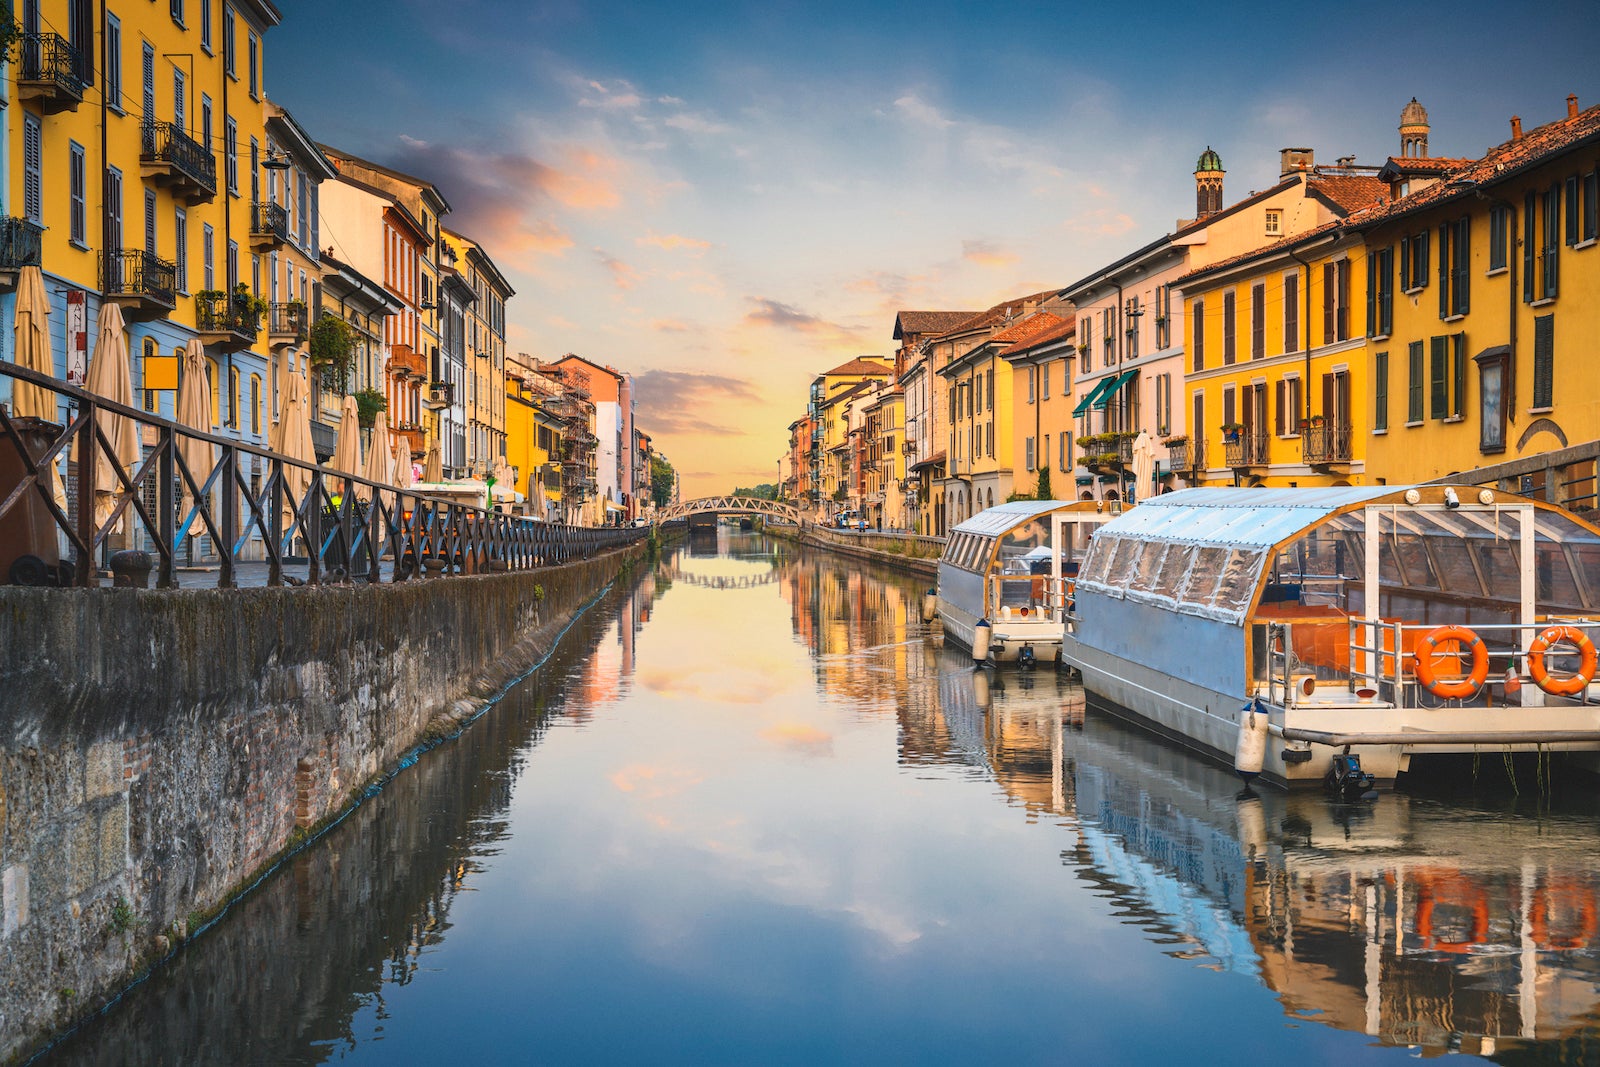 You are currently viewing Round-trip flights to Milan starting at $445